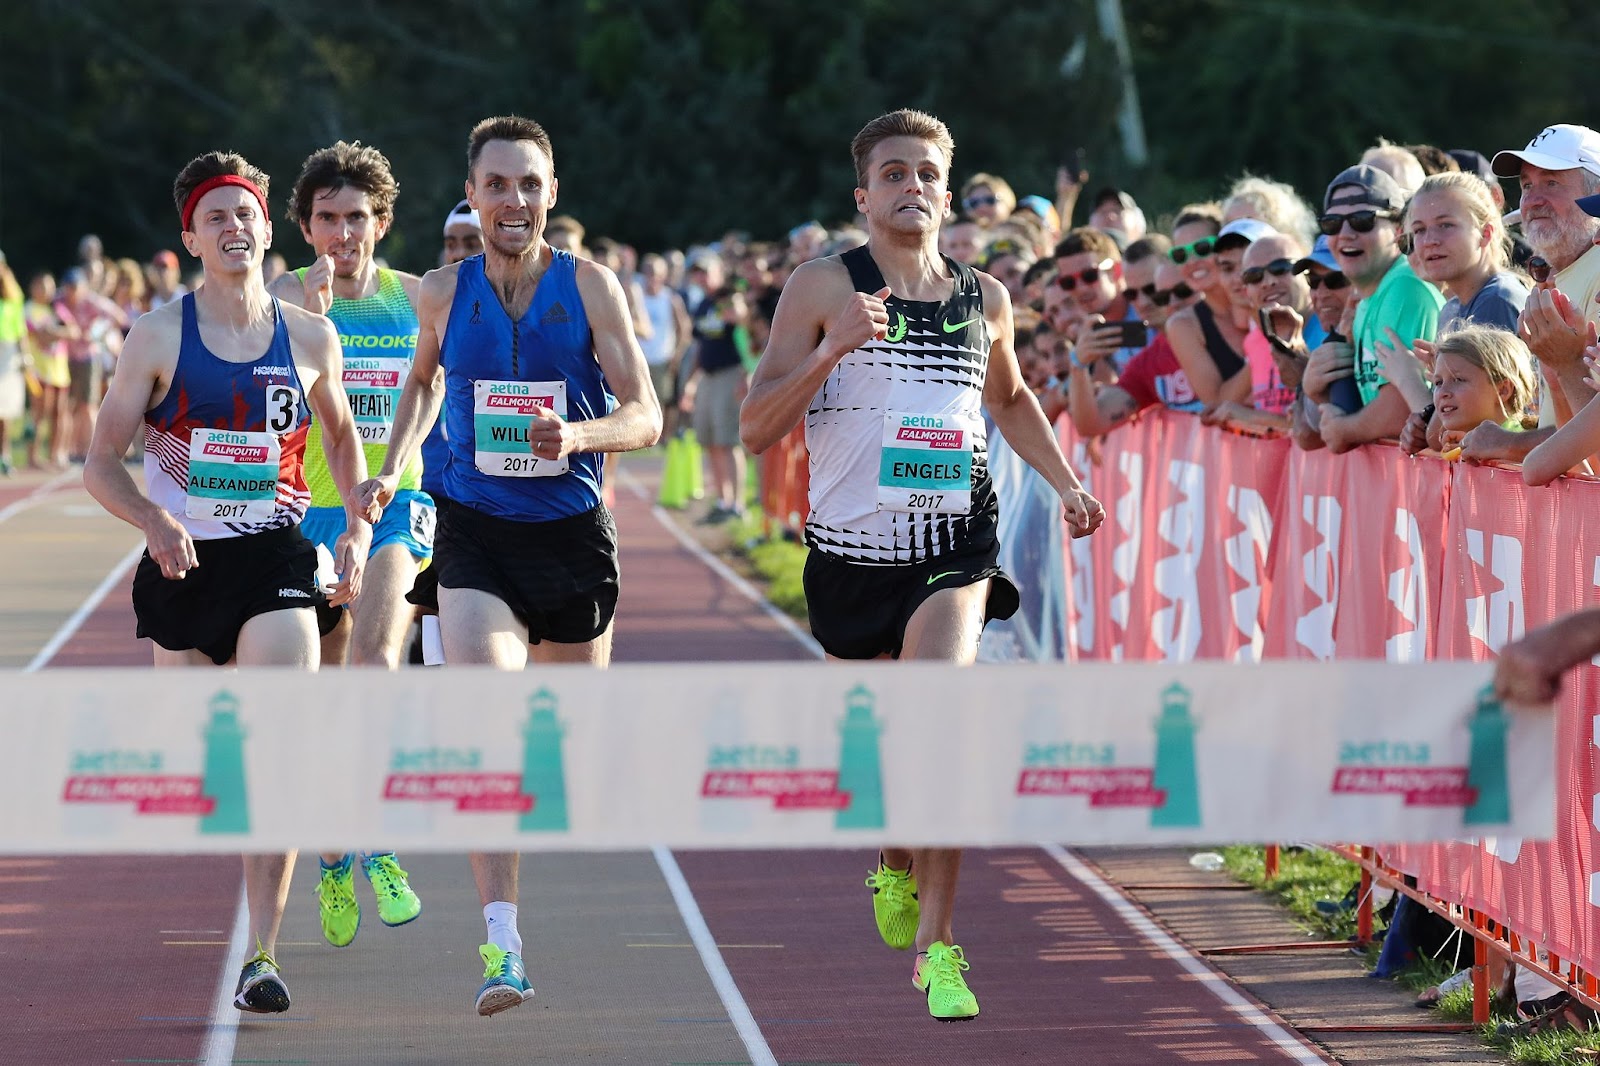 Olympians, Two-Time Men's Champion and 2018 Women's Runner-Up Lead 25th  Falmouth Elite Mile Field - Running USA